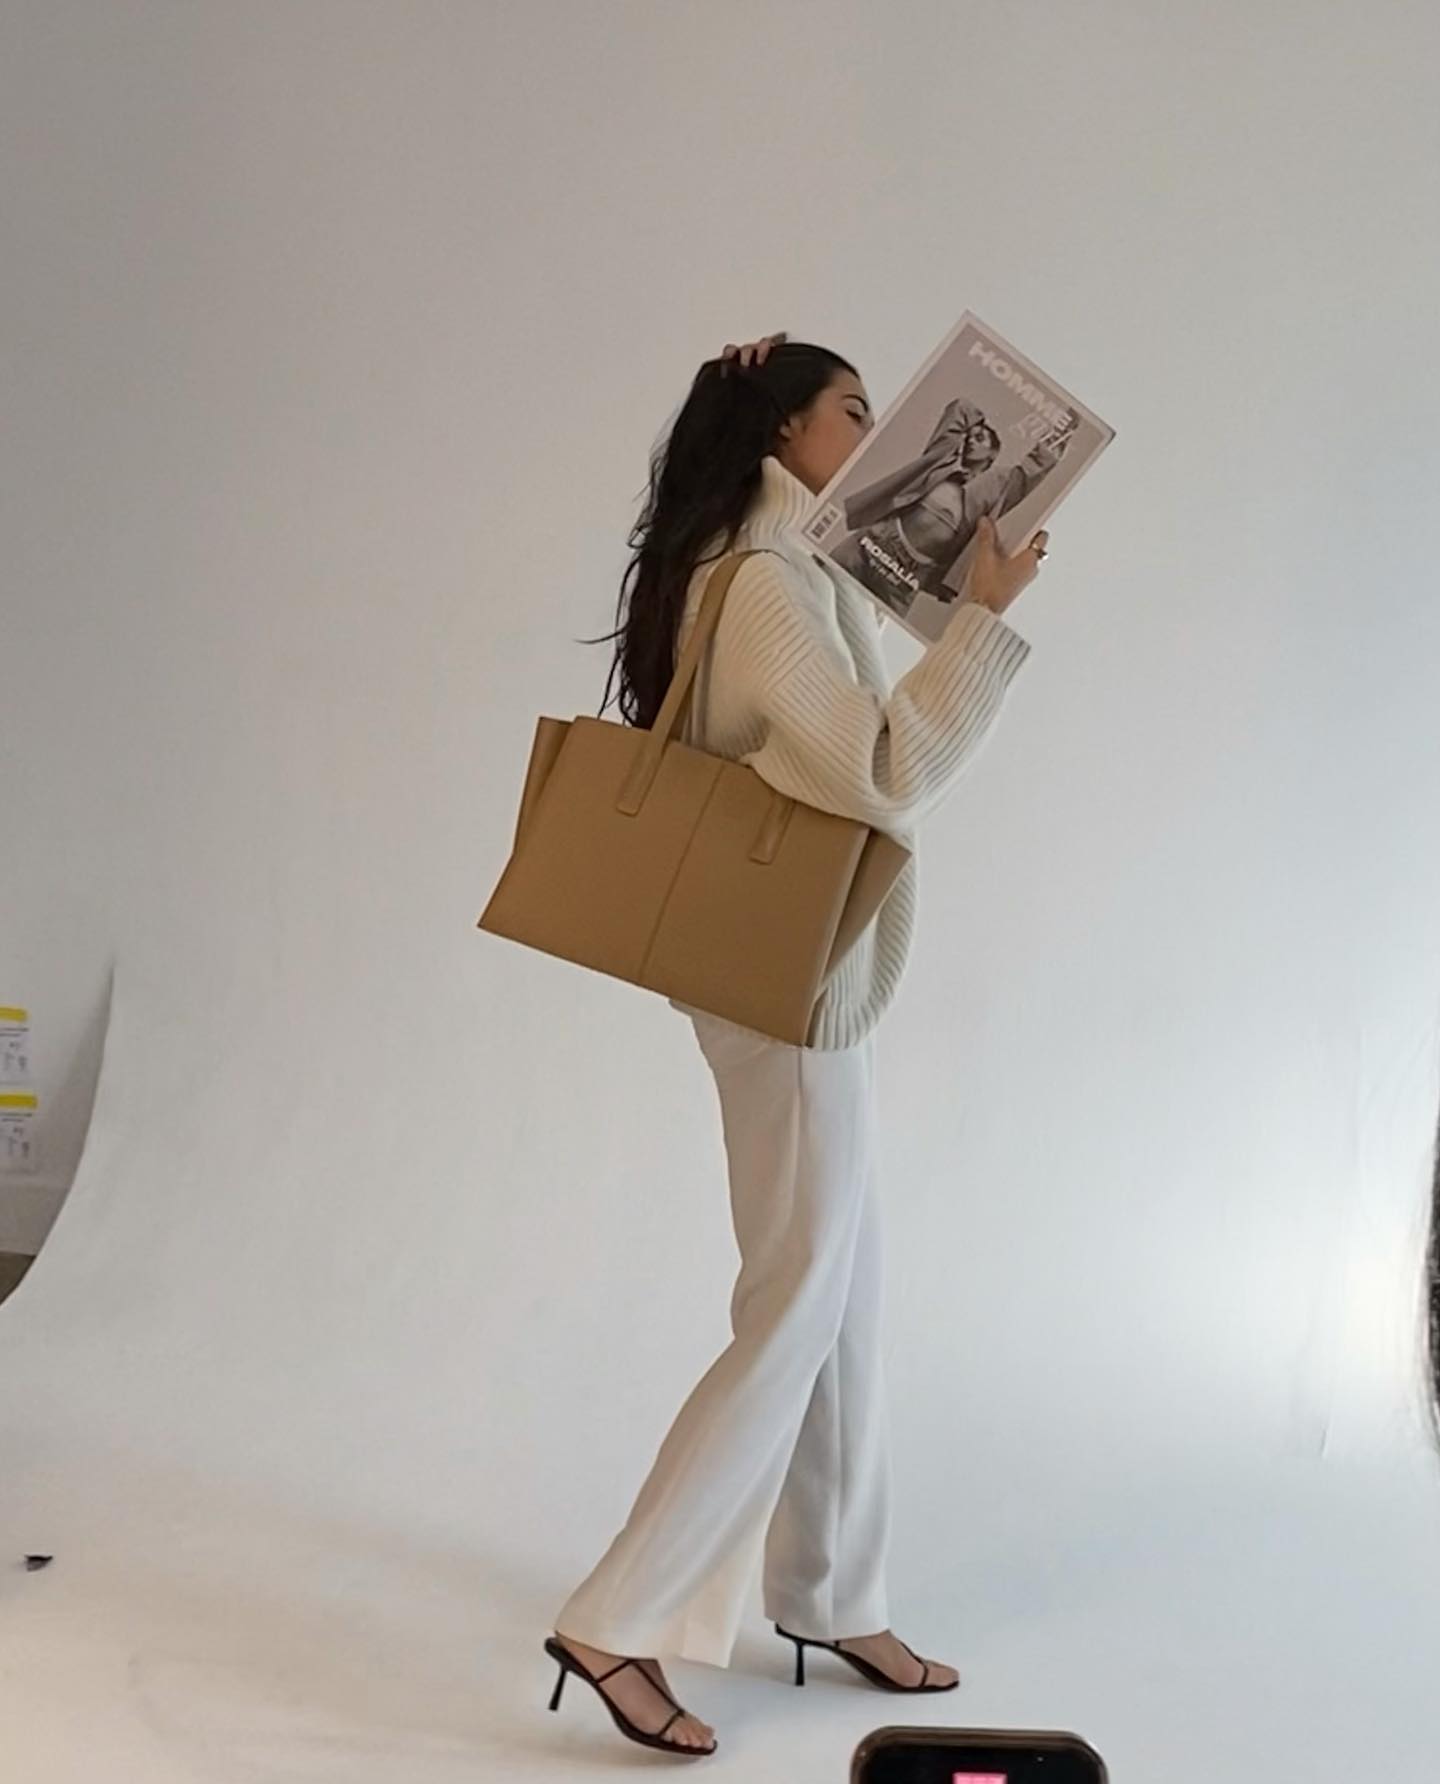 Woman in front of white backdrop wearing all white, holding newspaper, and wearing an oversize Freja tote in a khaki color on her shoulder.